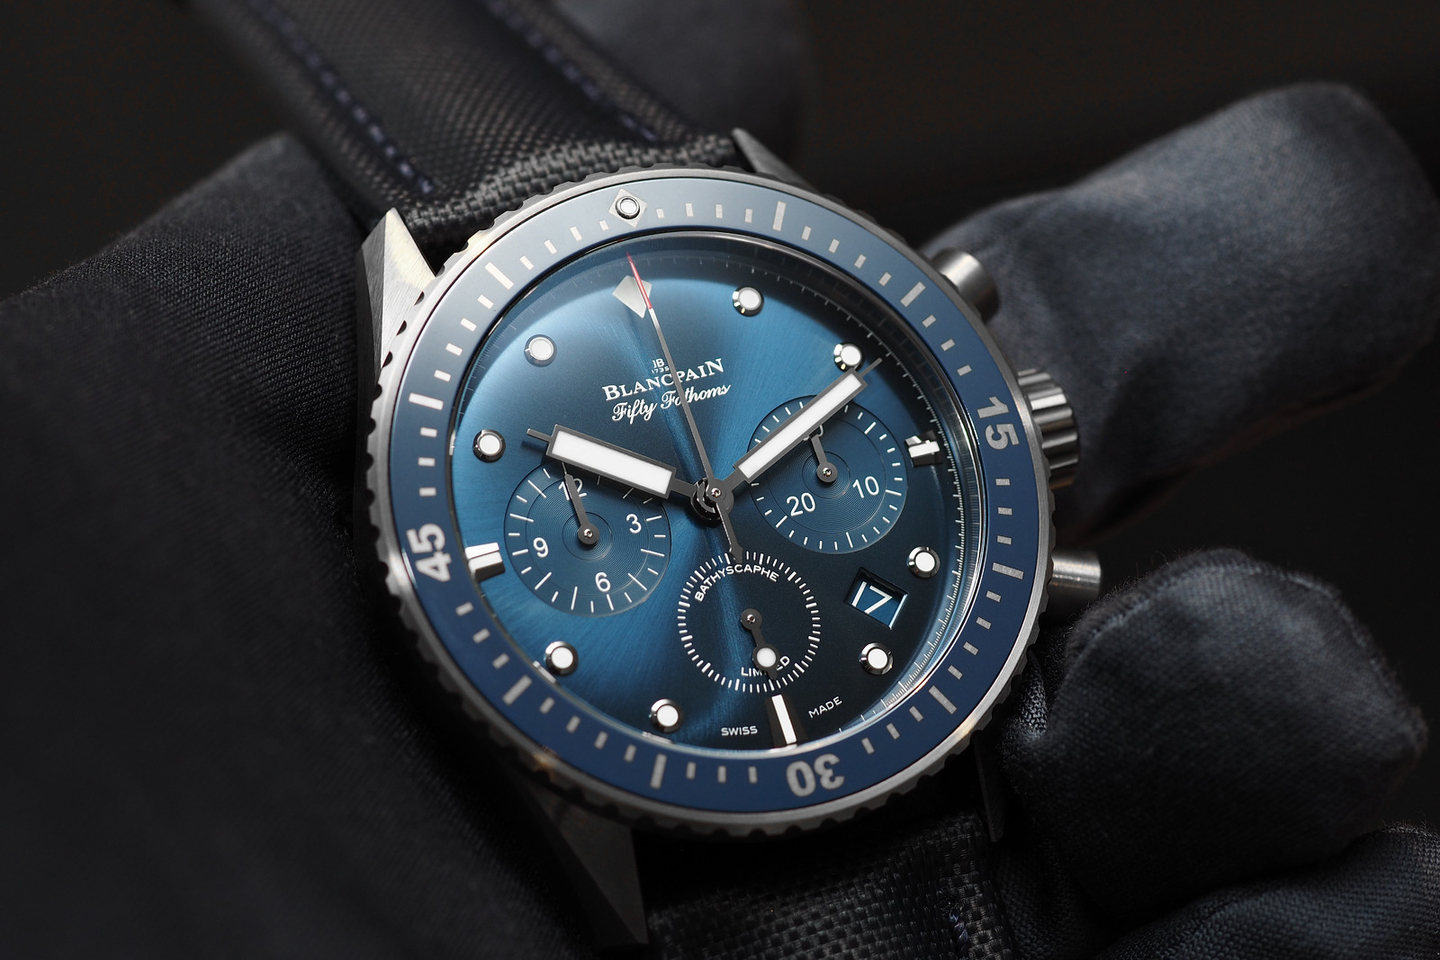 Hands-On with Bathyscaphe Chronograph Flyback Ocean Commitment